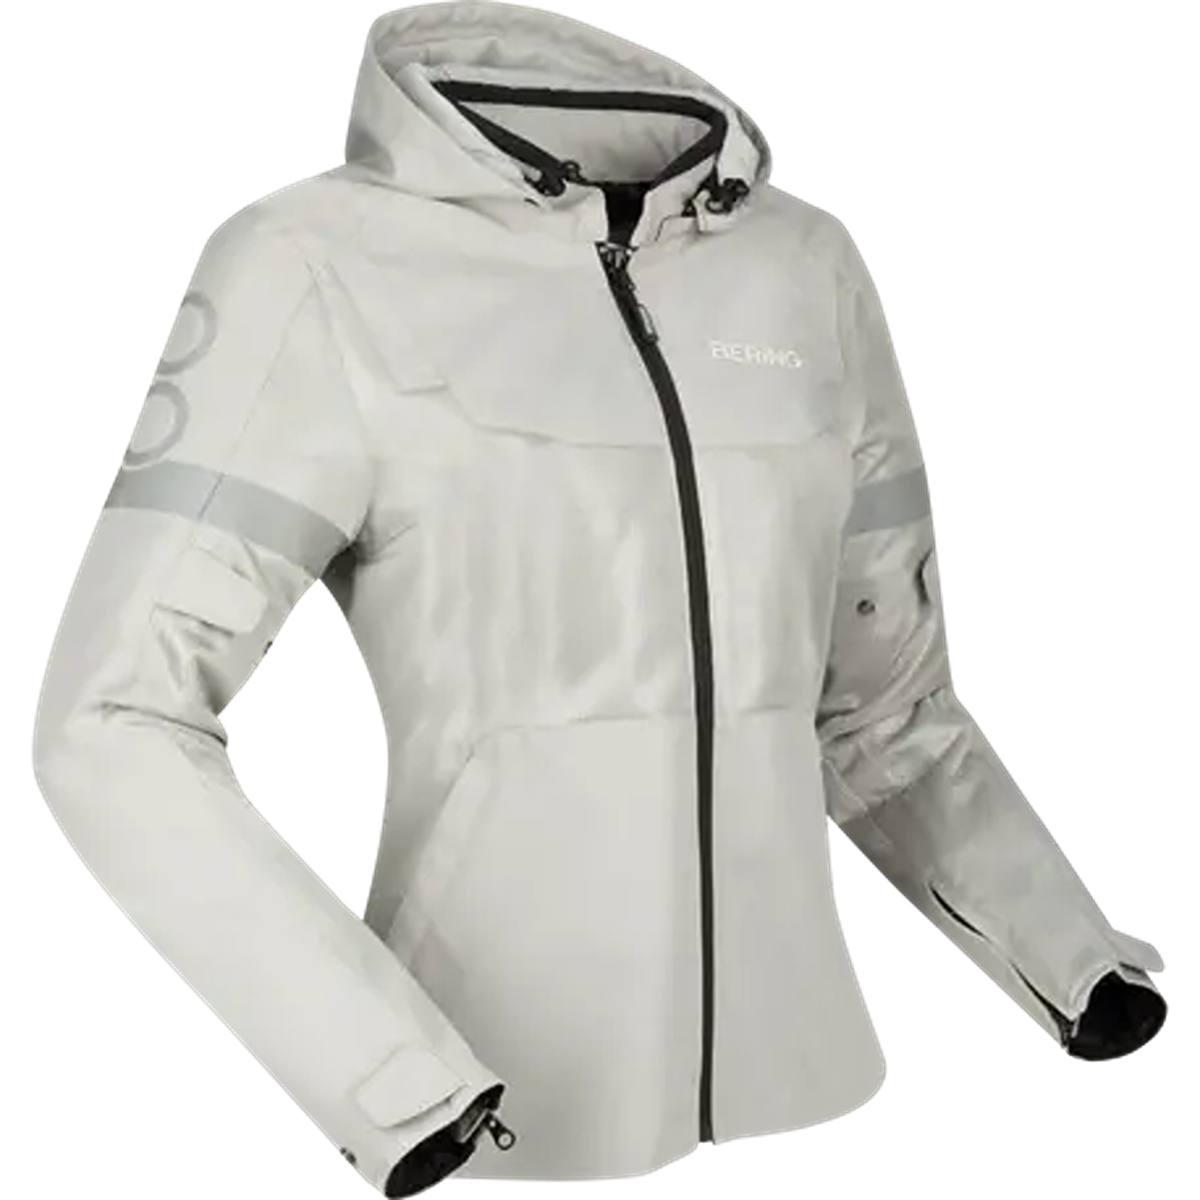 Image of Bering Lady Profil Jacket Grey Black Taille T1